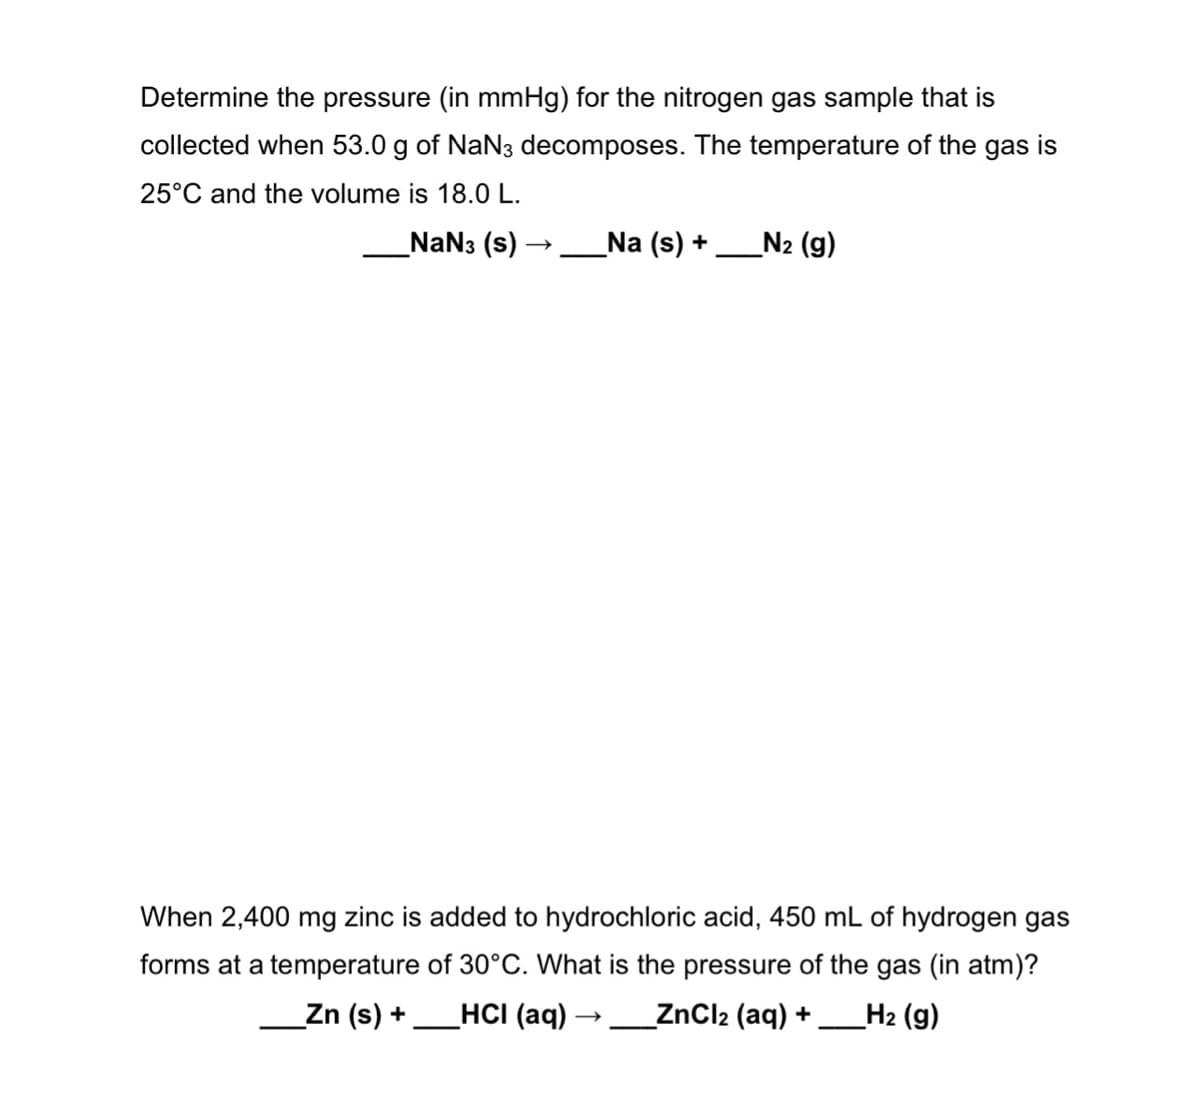 Determine the pressure (in mmHg) for the nitrogen gas sample that is
collected when 53.0 g of NaN3 decomposes. The temperature of the gas is
25°C and the volume is 18.0 L.
NaN3 (s) -
_Na (s) +
N2 (g)
When 2,400 mg zinc is added to hydrochloric acid, 450 mL of hydrogen gas
forms at a temperature of 30°C. What is the pressure of the gas (in atm)?
Zn (s) +
HCI (aq)
_ZnCl2 (aq) +
H2 (g)
